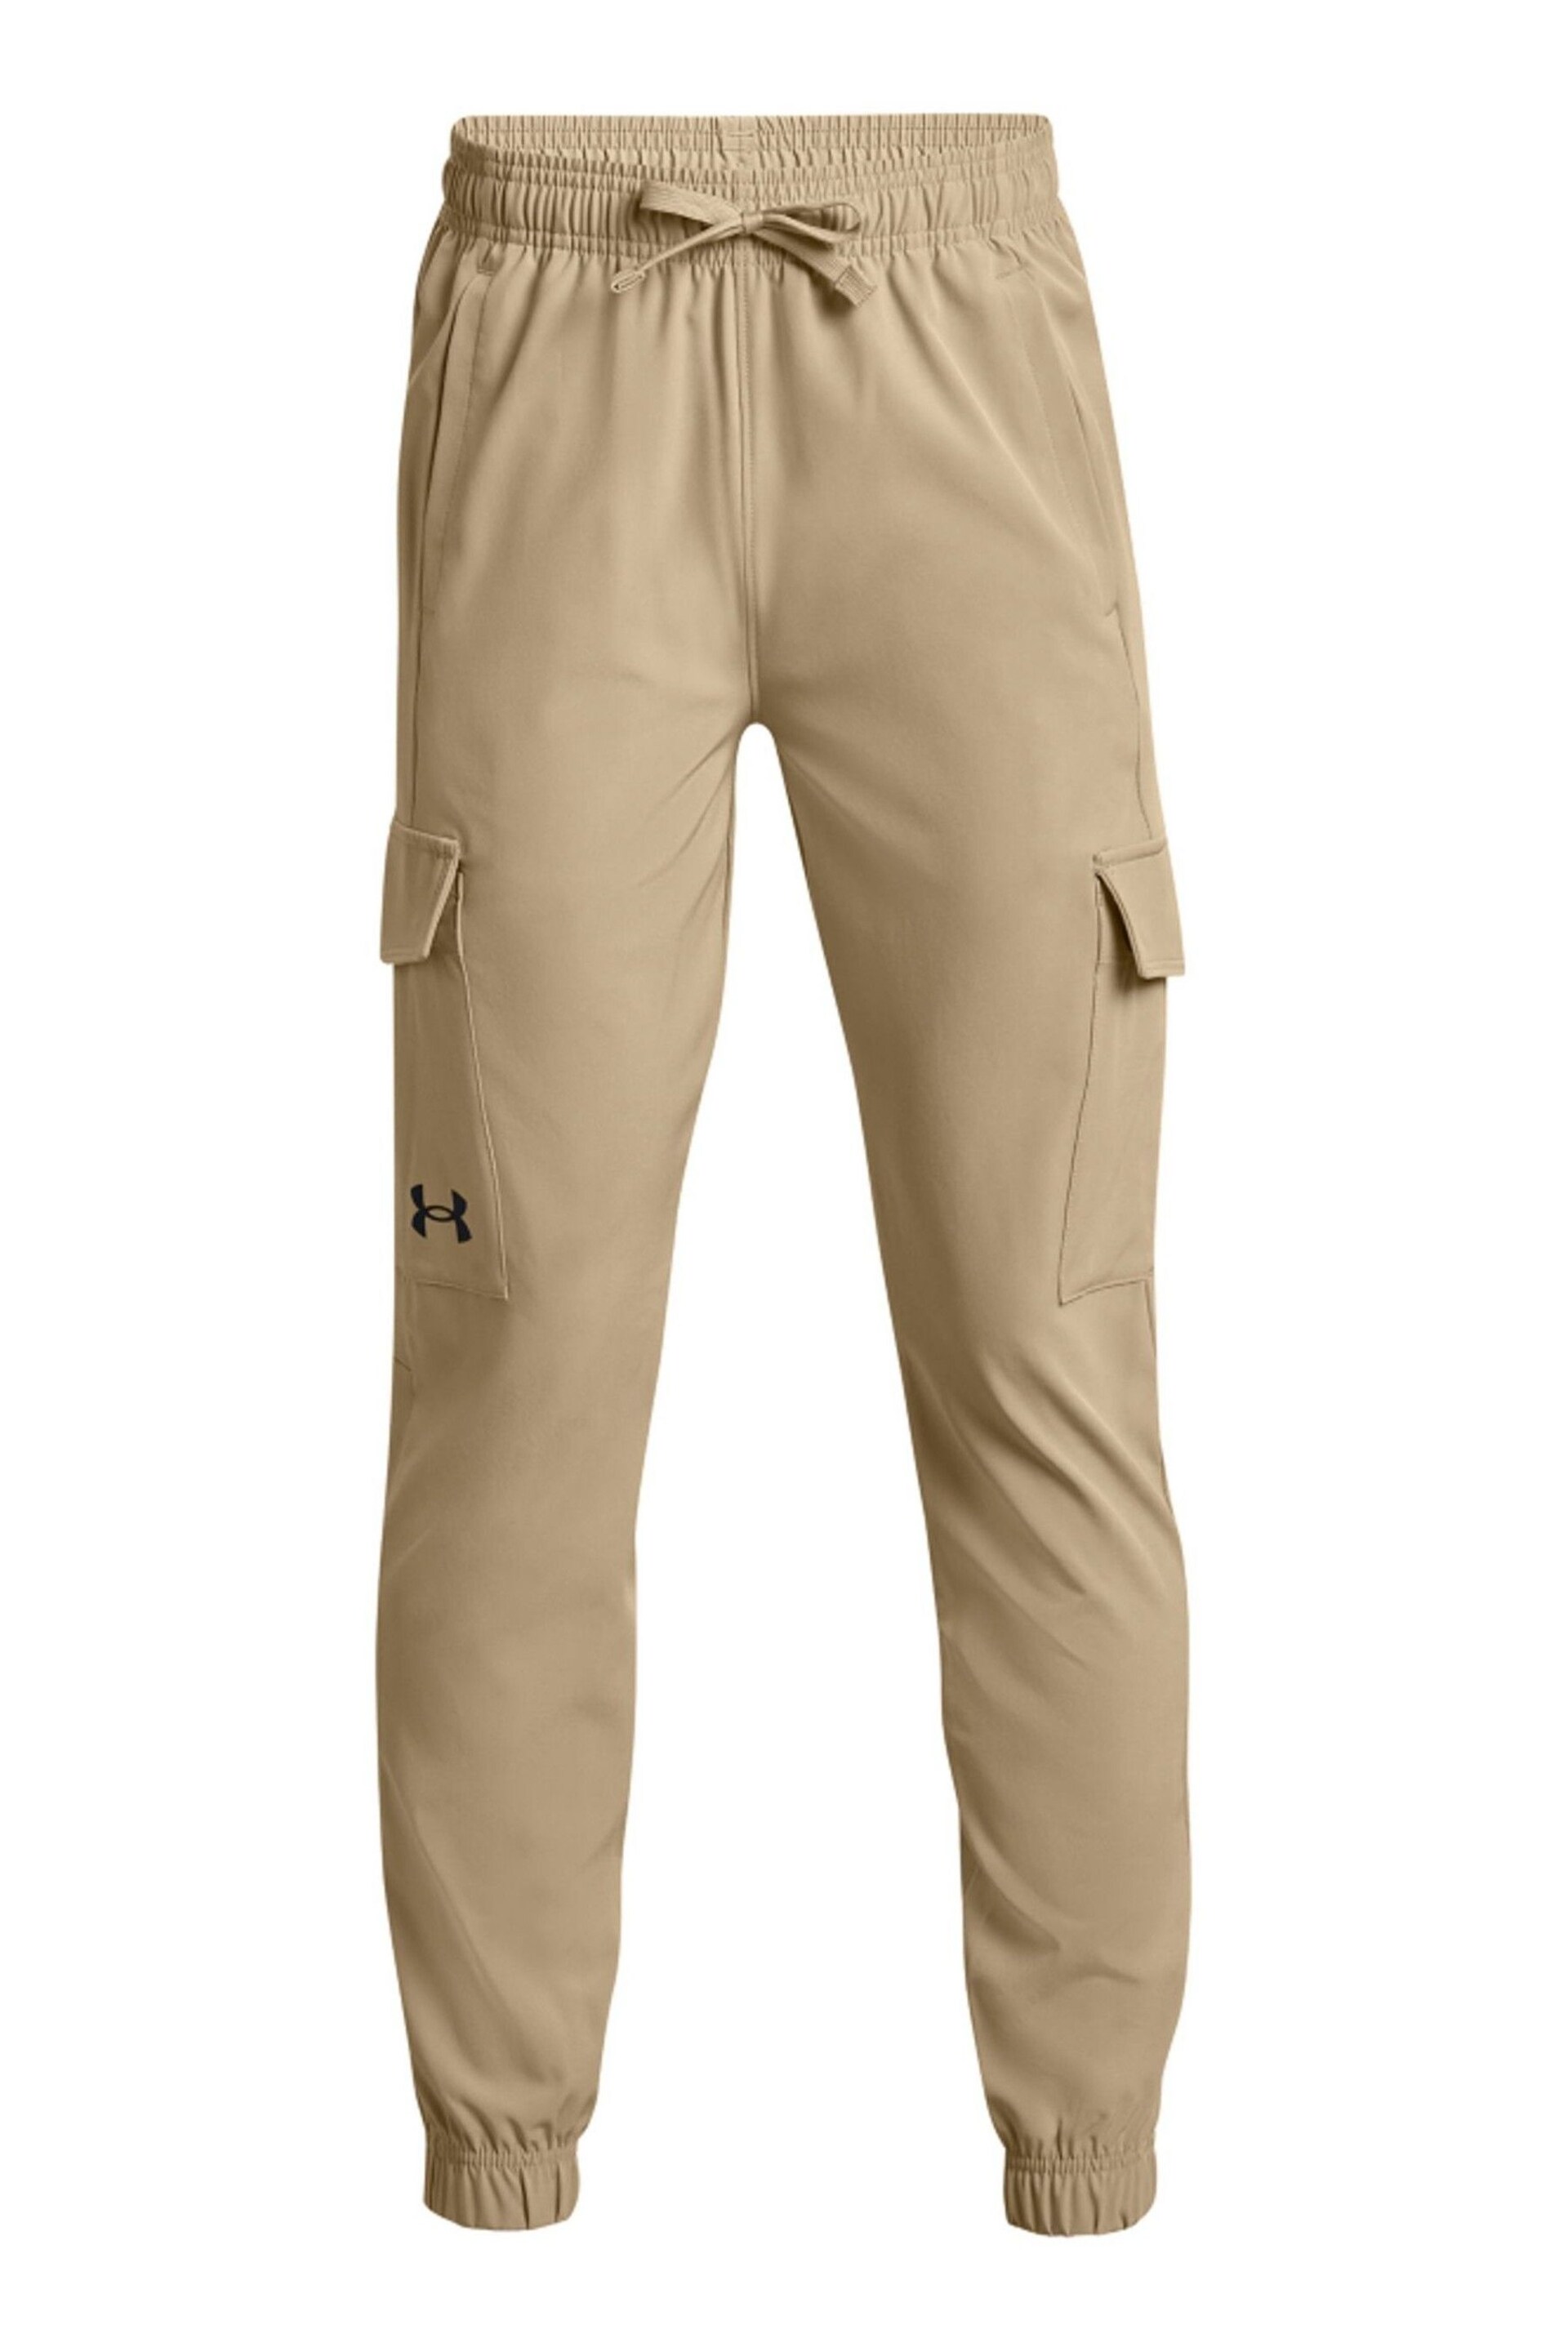 Under Armour Cream Pennant Woven Cargo Joggers - Image 1 of 2